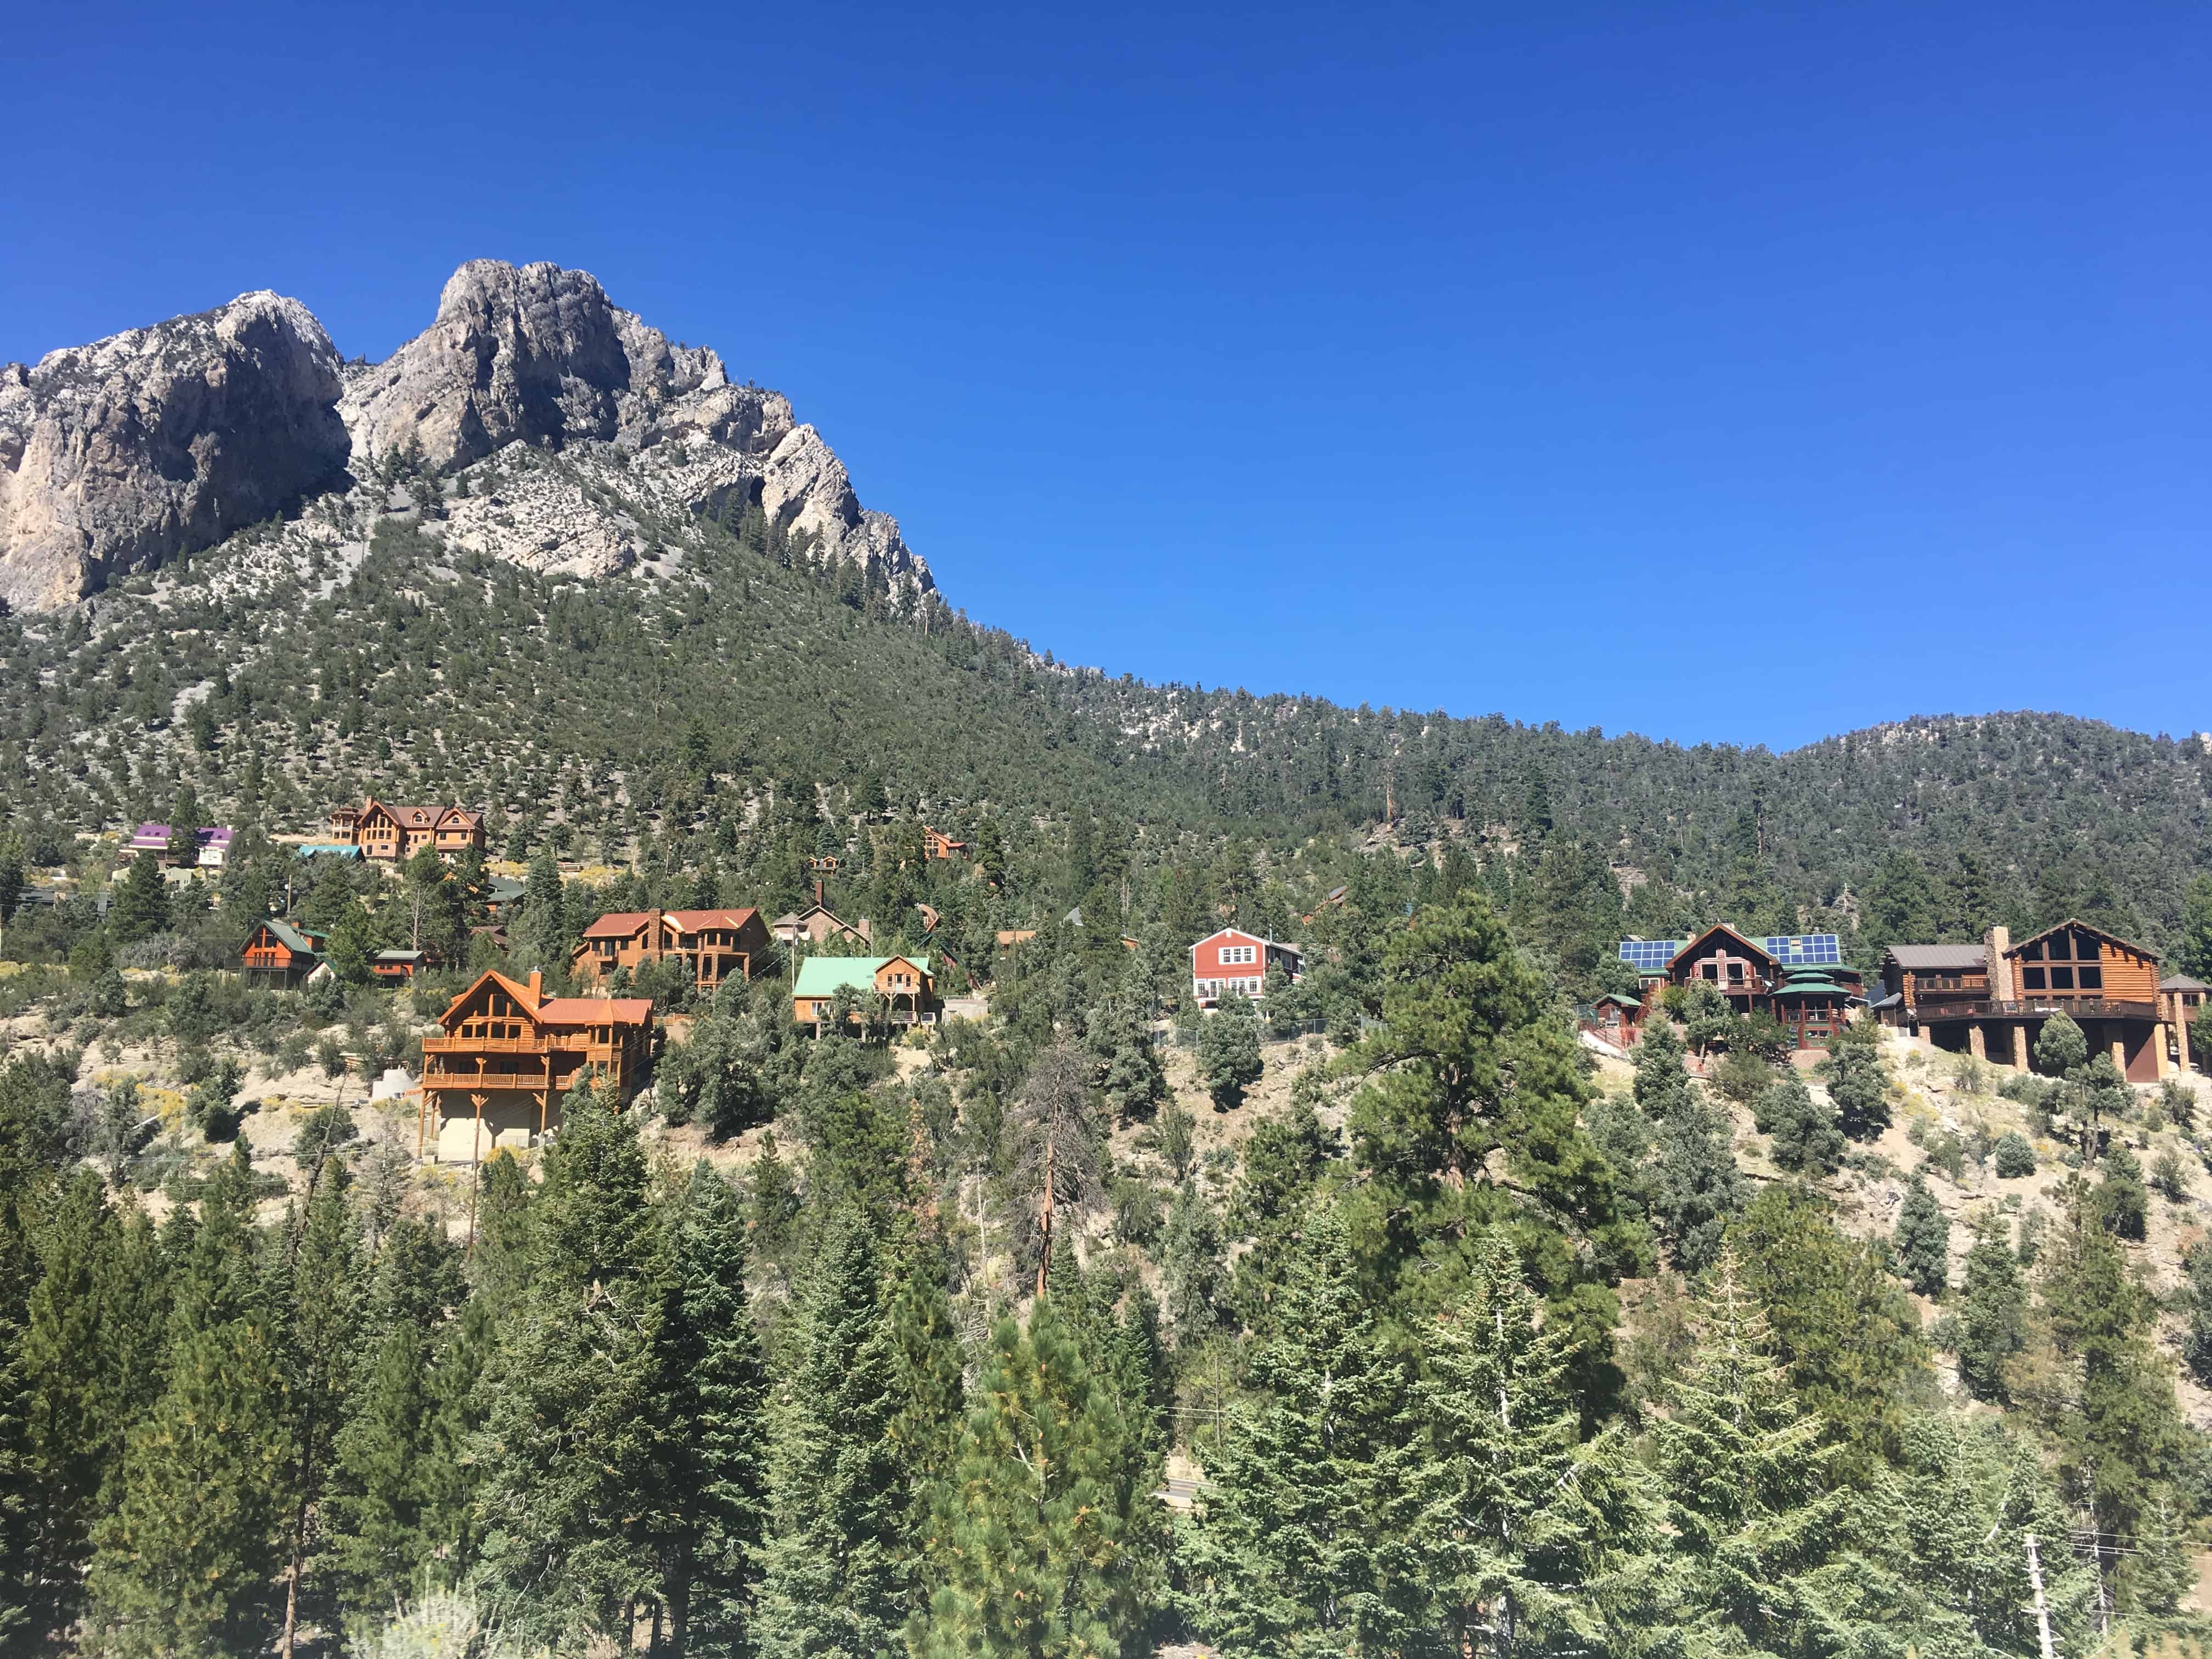 Homes along the scenic drive in Mount Charleston, Nevada